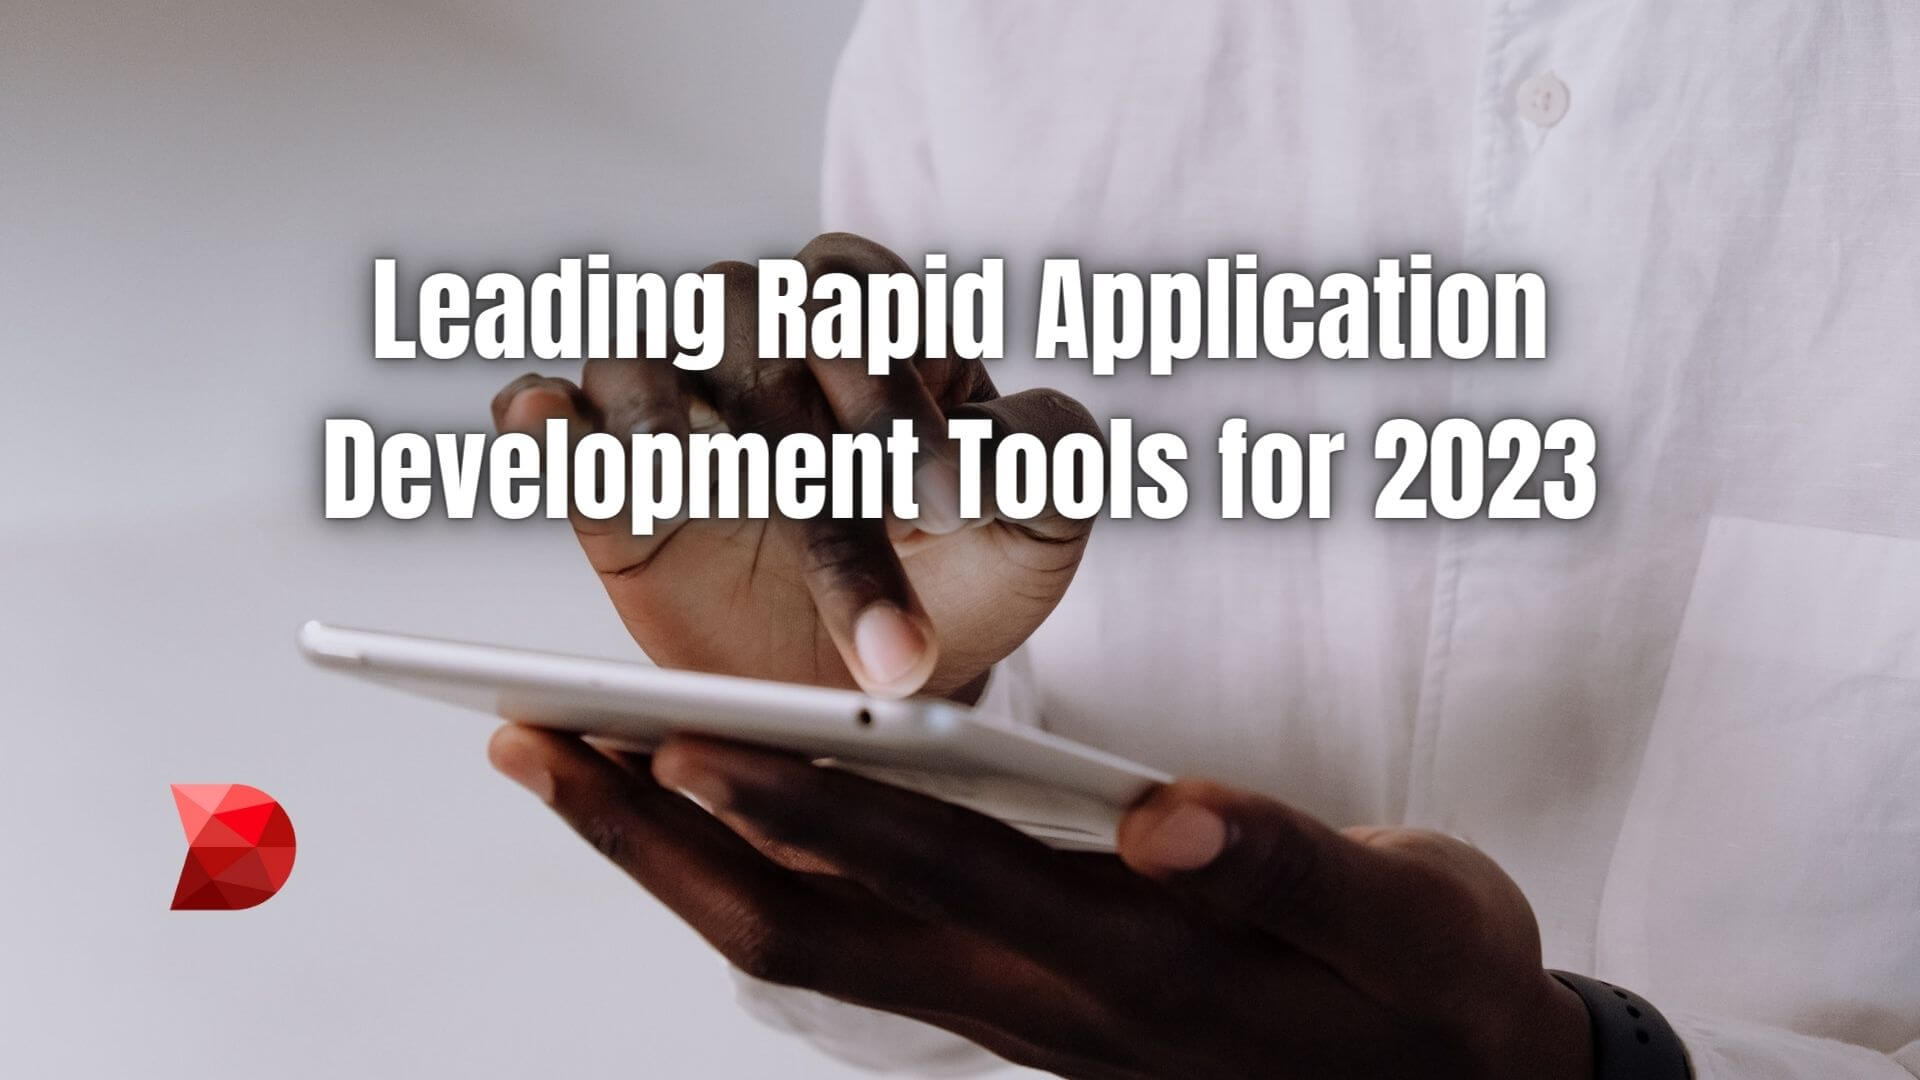 Rapid application development tools are becoming more important to developers to produce or deploy web applications quickly. Learn more!